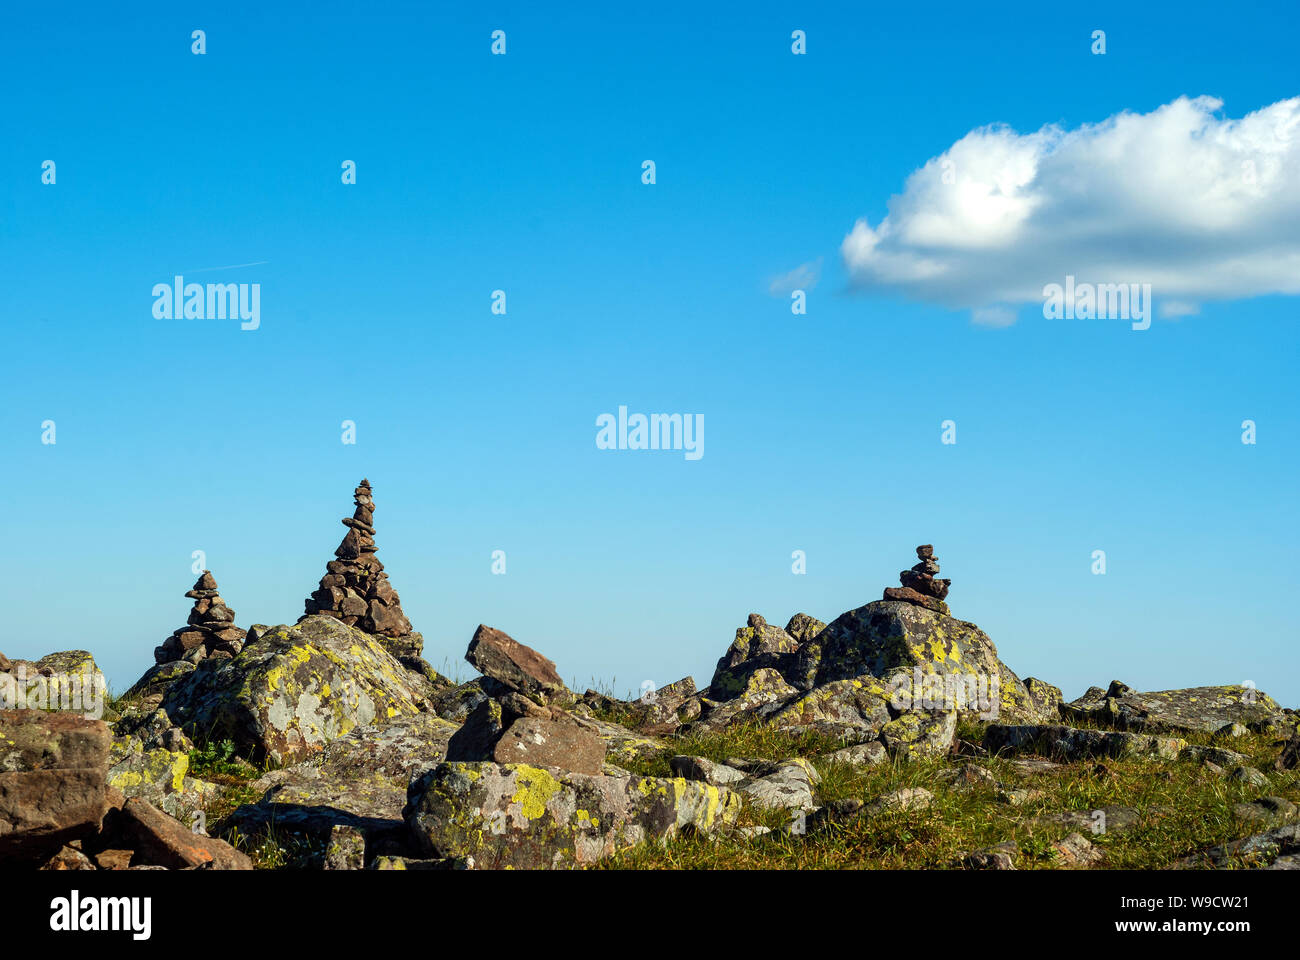 bright landscape of a high-altitude plateau with folded travelers pyramids cairns of stones under a blue sky with clouds Stock Photo